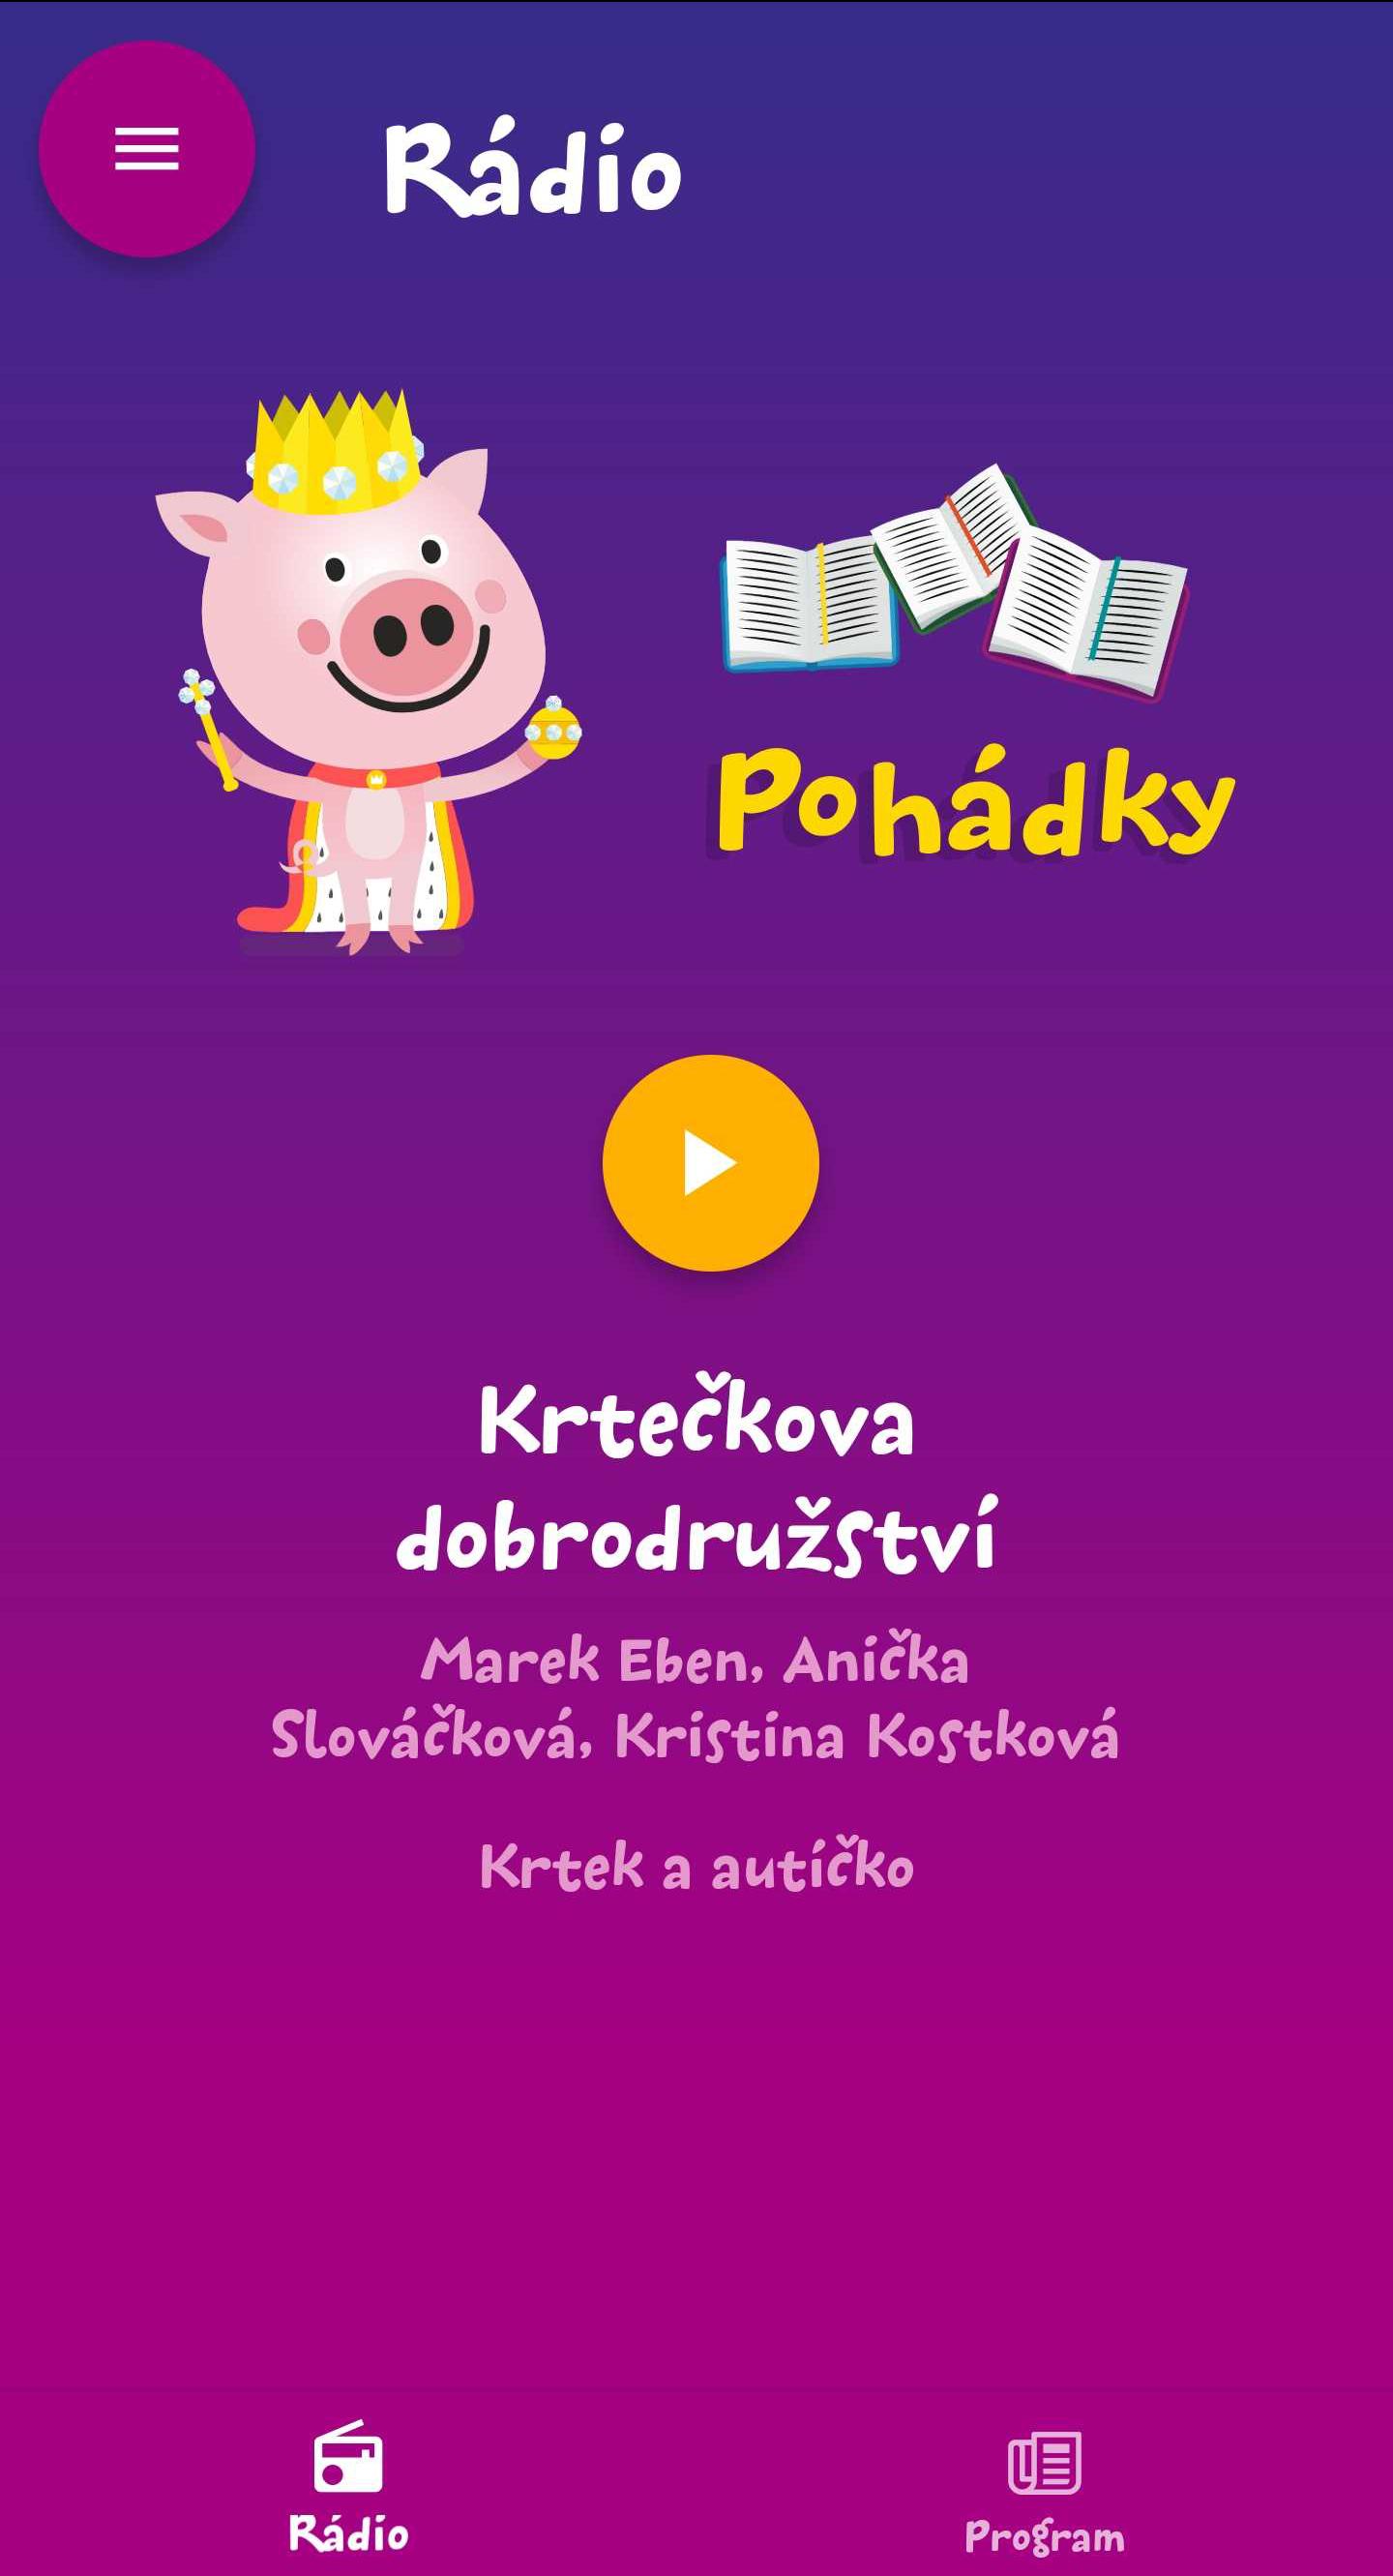 Pigy rádio for Android - APK Download